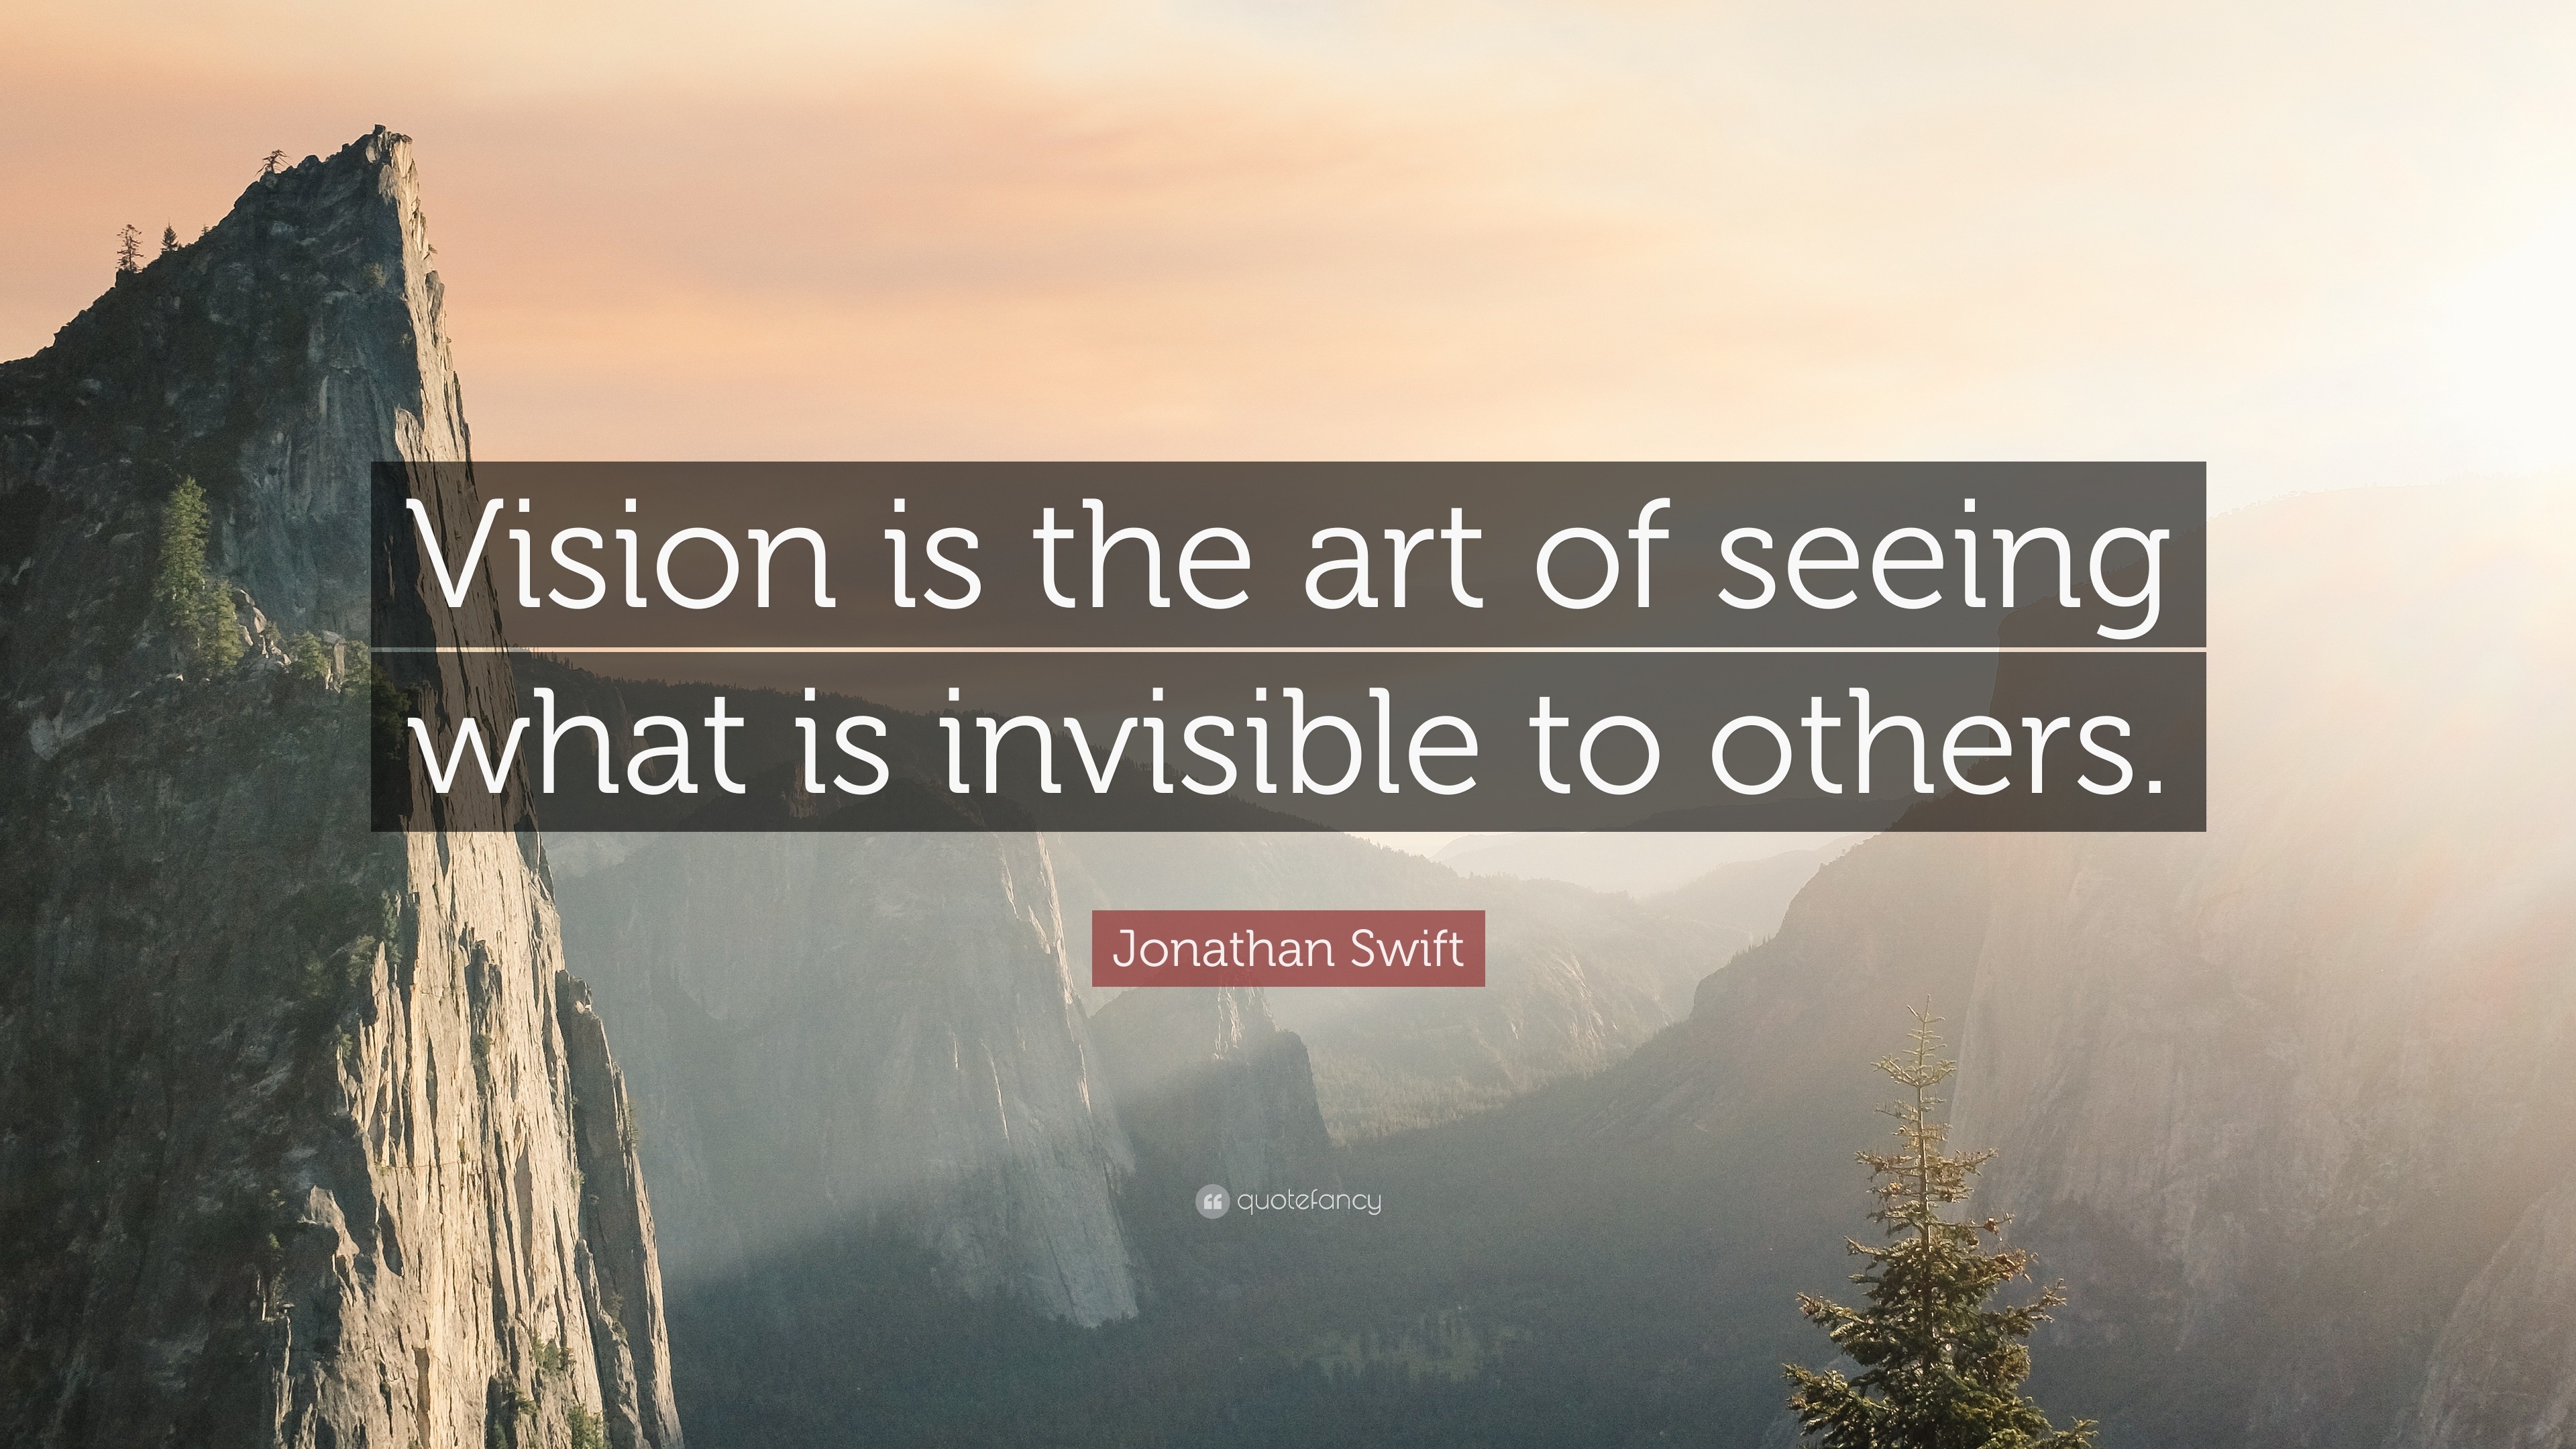 Jonathan Swift Quote “Vision is the art of seeing what is